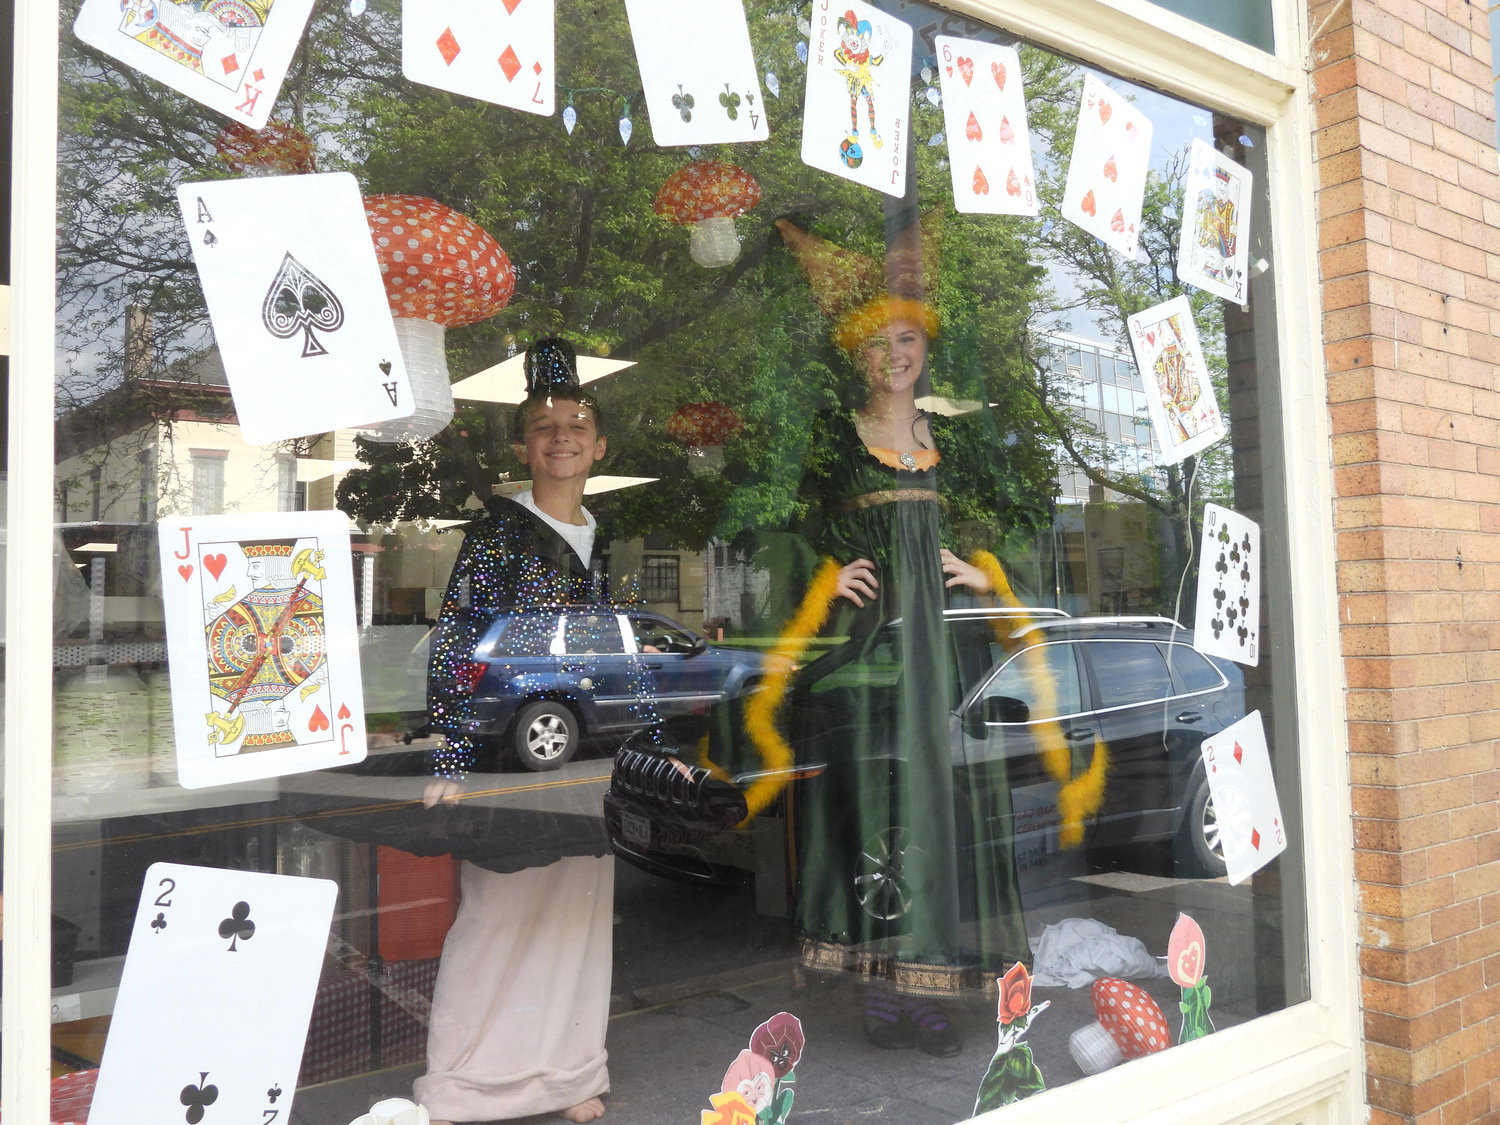 The Oneida Parks and Recreation Department's "Through the Looking Glass" event featured  members of the Bogardus Performing Art Center and the city taking the role of beloved characters of "Alice in Wonderland," with actors taking center stage in storefronts through the city.